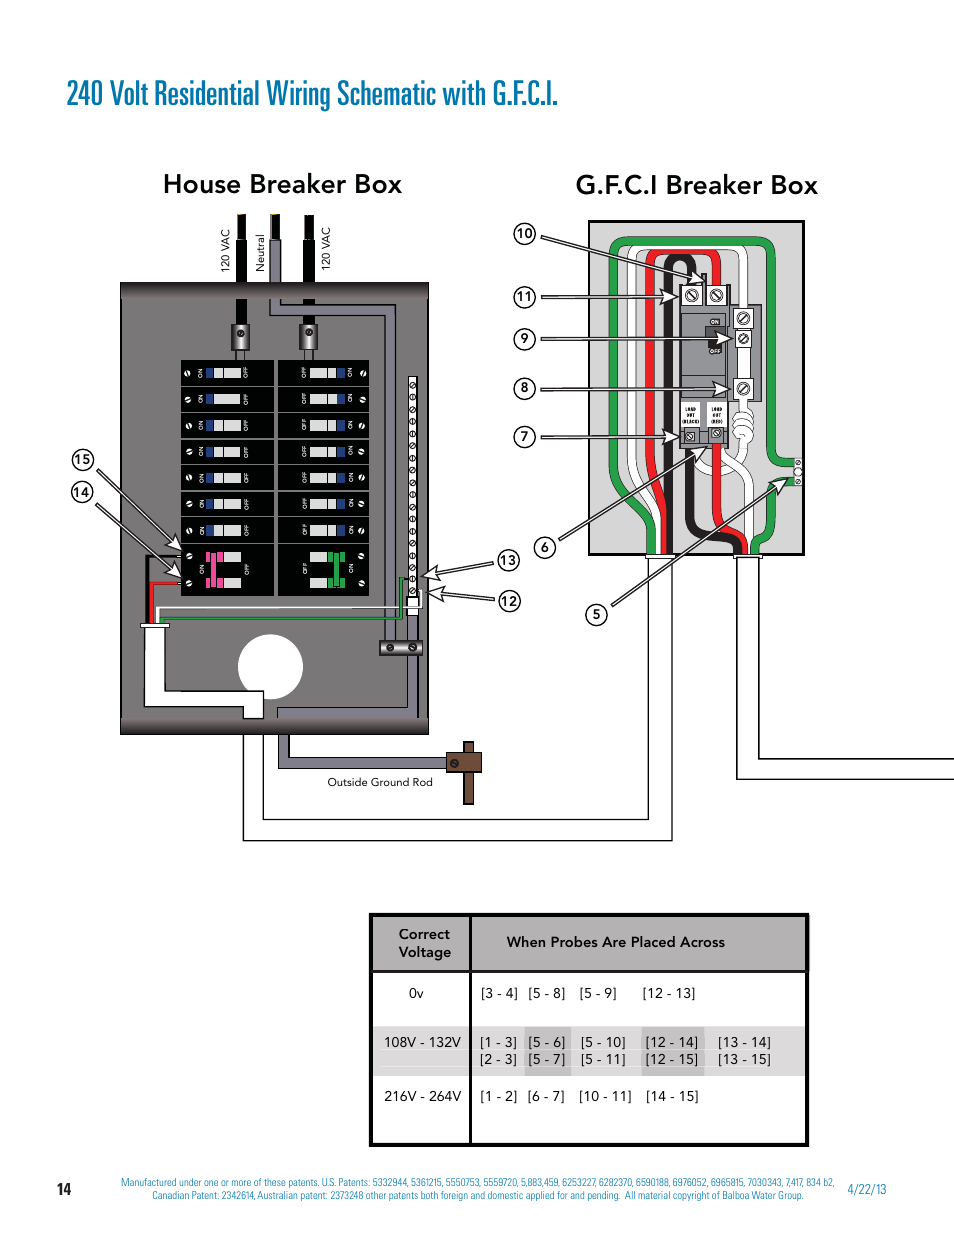 240 volt residential wiring schematic with g.f.c.i, House breaker box g.f.c.i breaker box